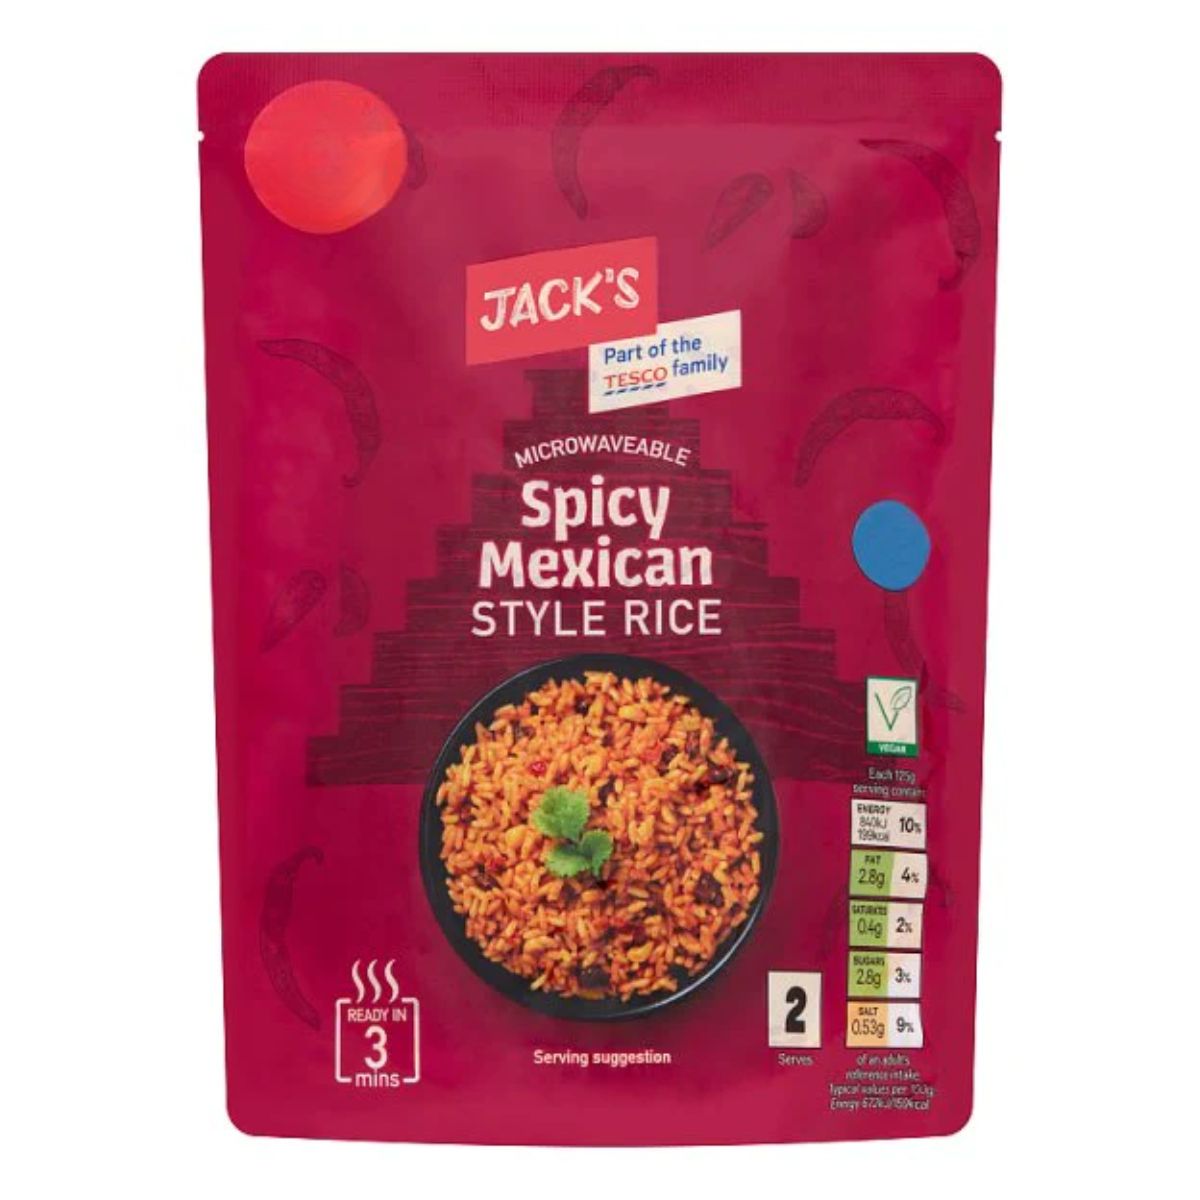 Jacks - Microwaveable Spicy Mexican Style Rice - 250g